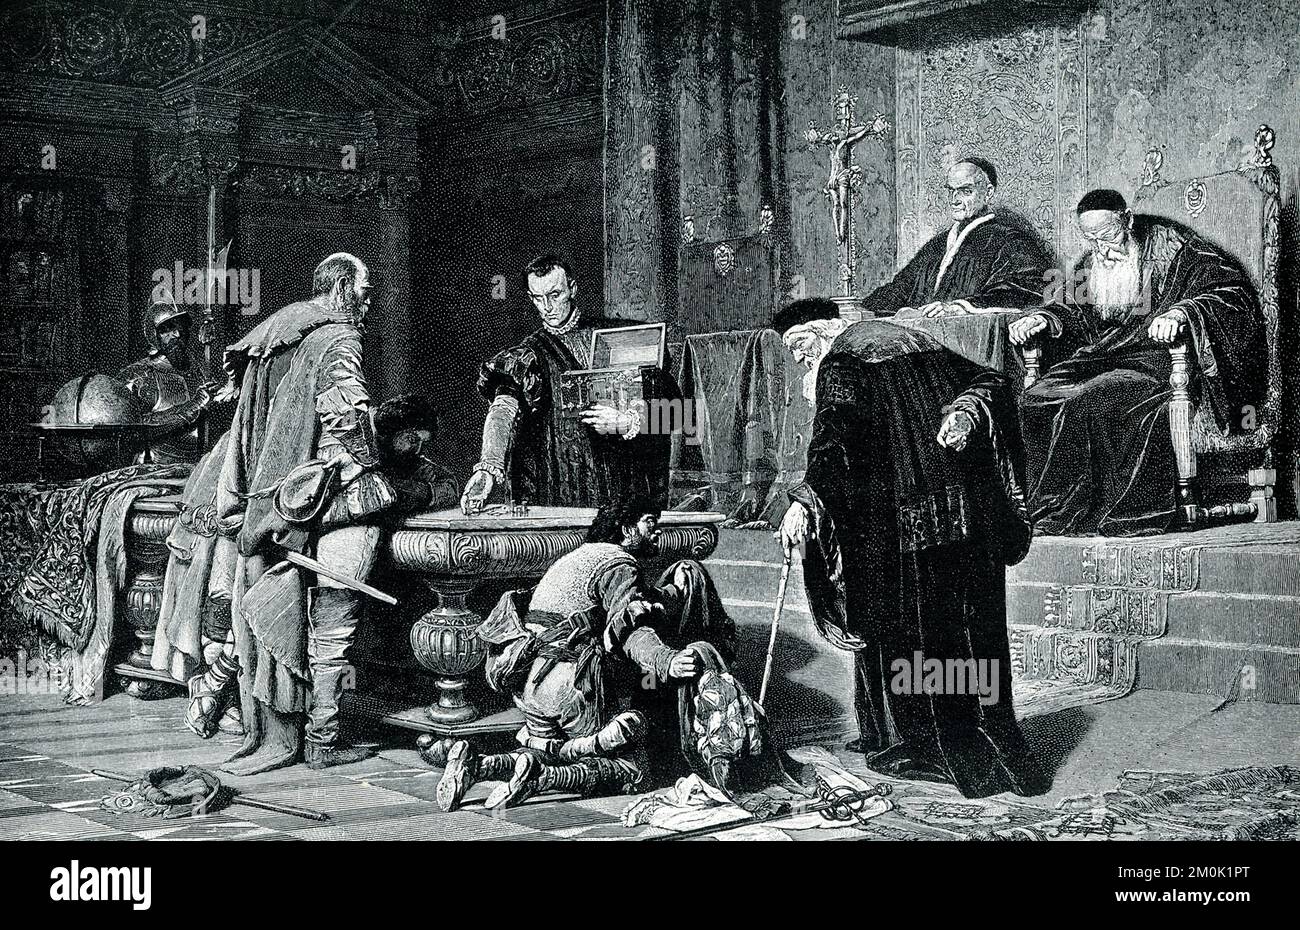 The 1906 caption reads: “Venice was nominally a republic, but all the power gradually fell into the hands of a council of three, who governed the city by secret murder. Any one whom the three marked as dangerous, disappeared without warning and without trace. This is Piloty’s famous picture, showing the grim and aged “Three” examining the proof that one of their victims has been slain, and scornfully paying the blood-money to the assassins.” Piloty (died 1886) was a German painter, noted for his historical subjects, and recognized as the foremost representative of the realistic school in Germa Stock Photo